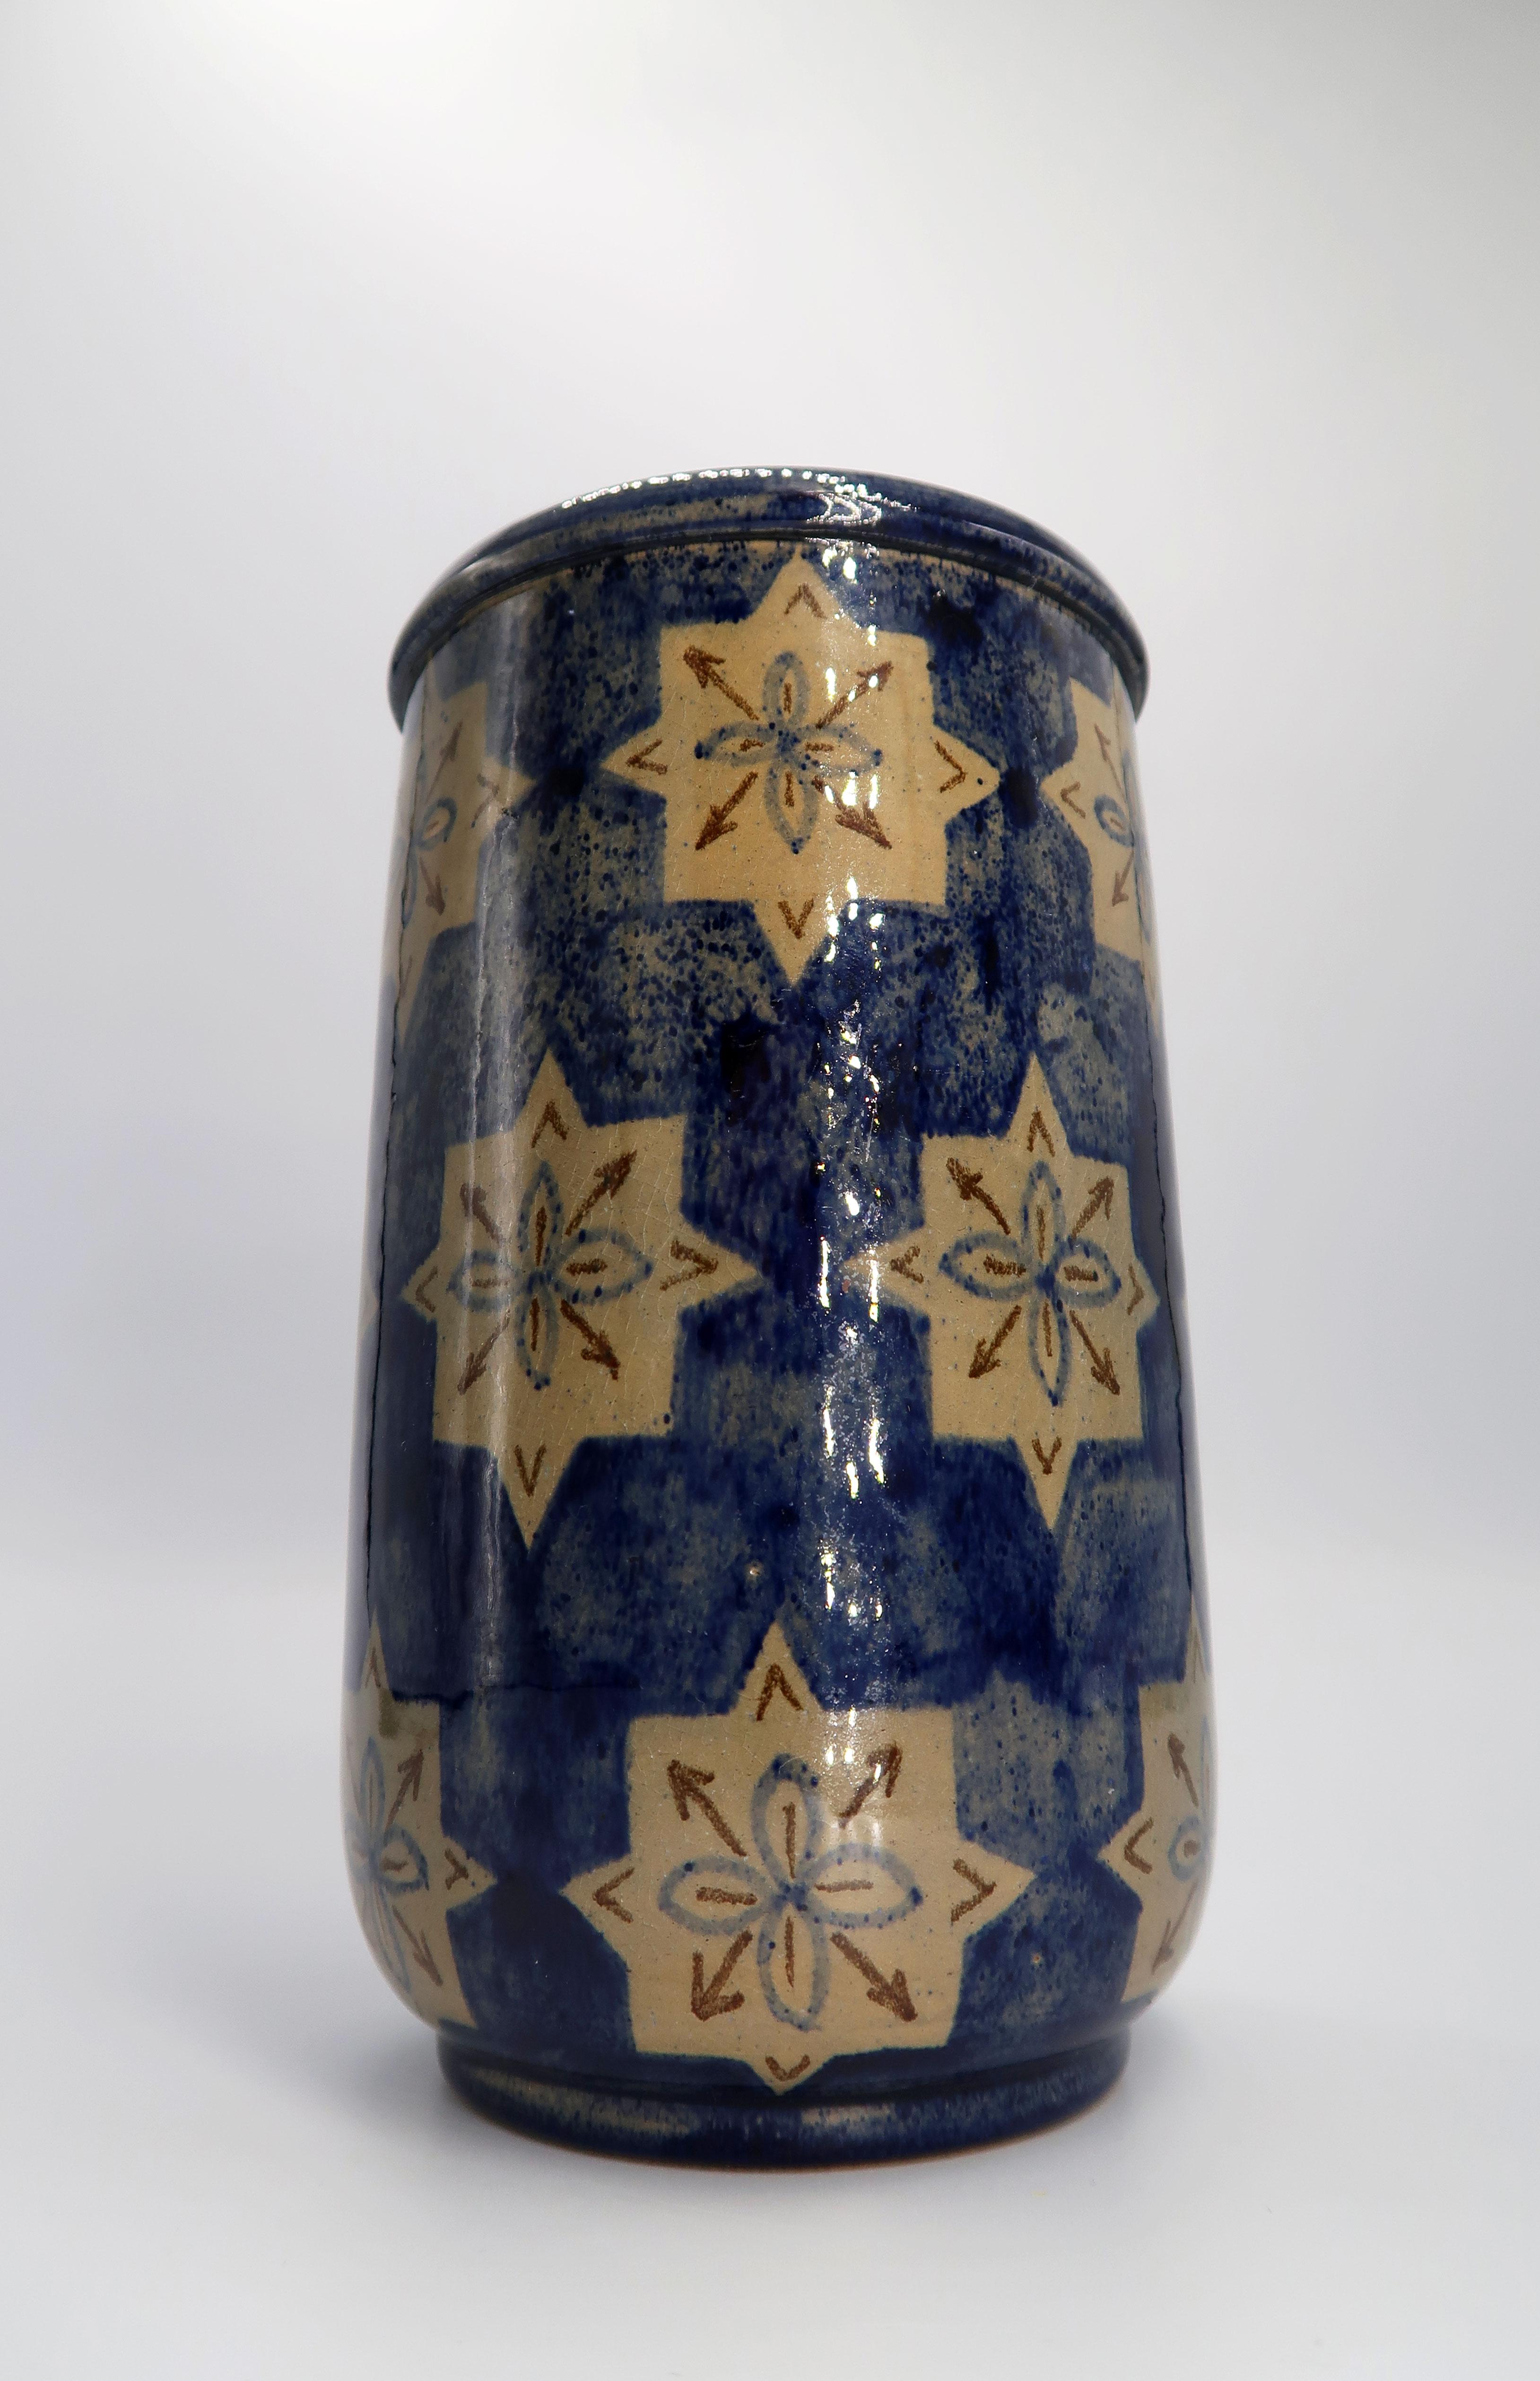 Beautiful Folk Art style Danish Mid-Century Modern handmade and hand painted ceramic vase from the early 1940s. Manufactured on the island of Bornholm by Søholm Keramik. Camel colored graphic star shapes with brown arrows on a dark blue, visibly